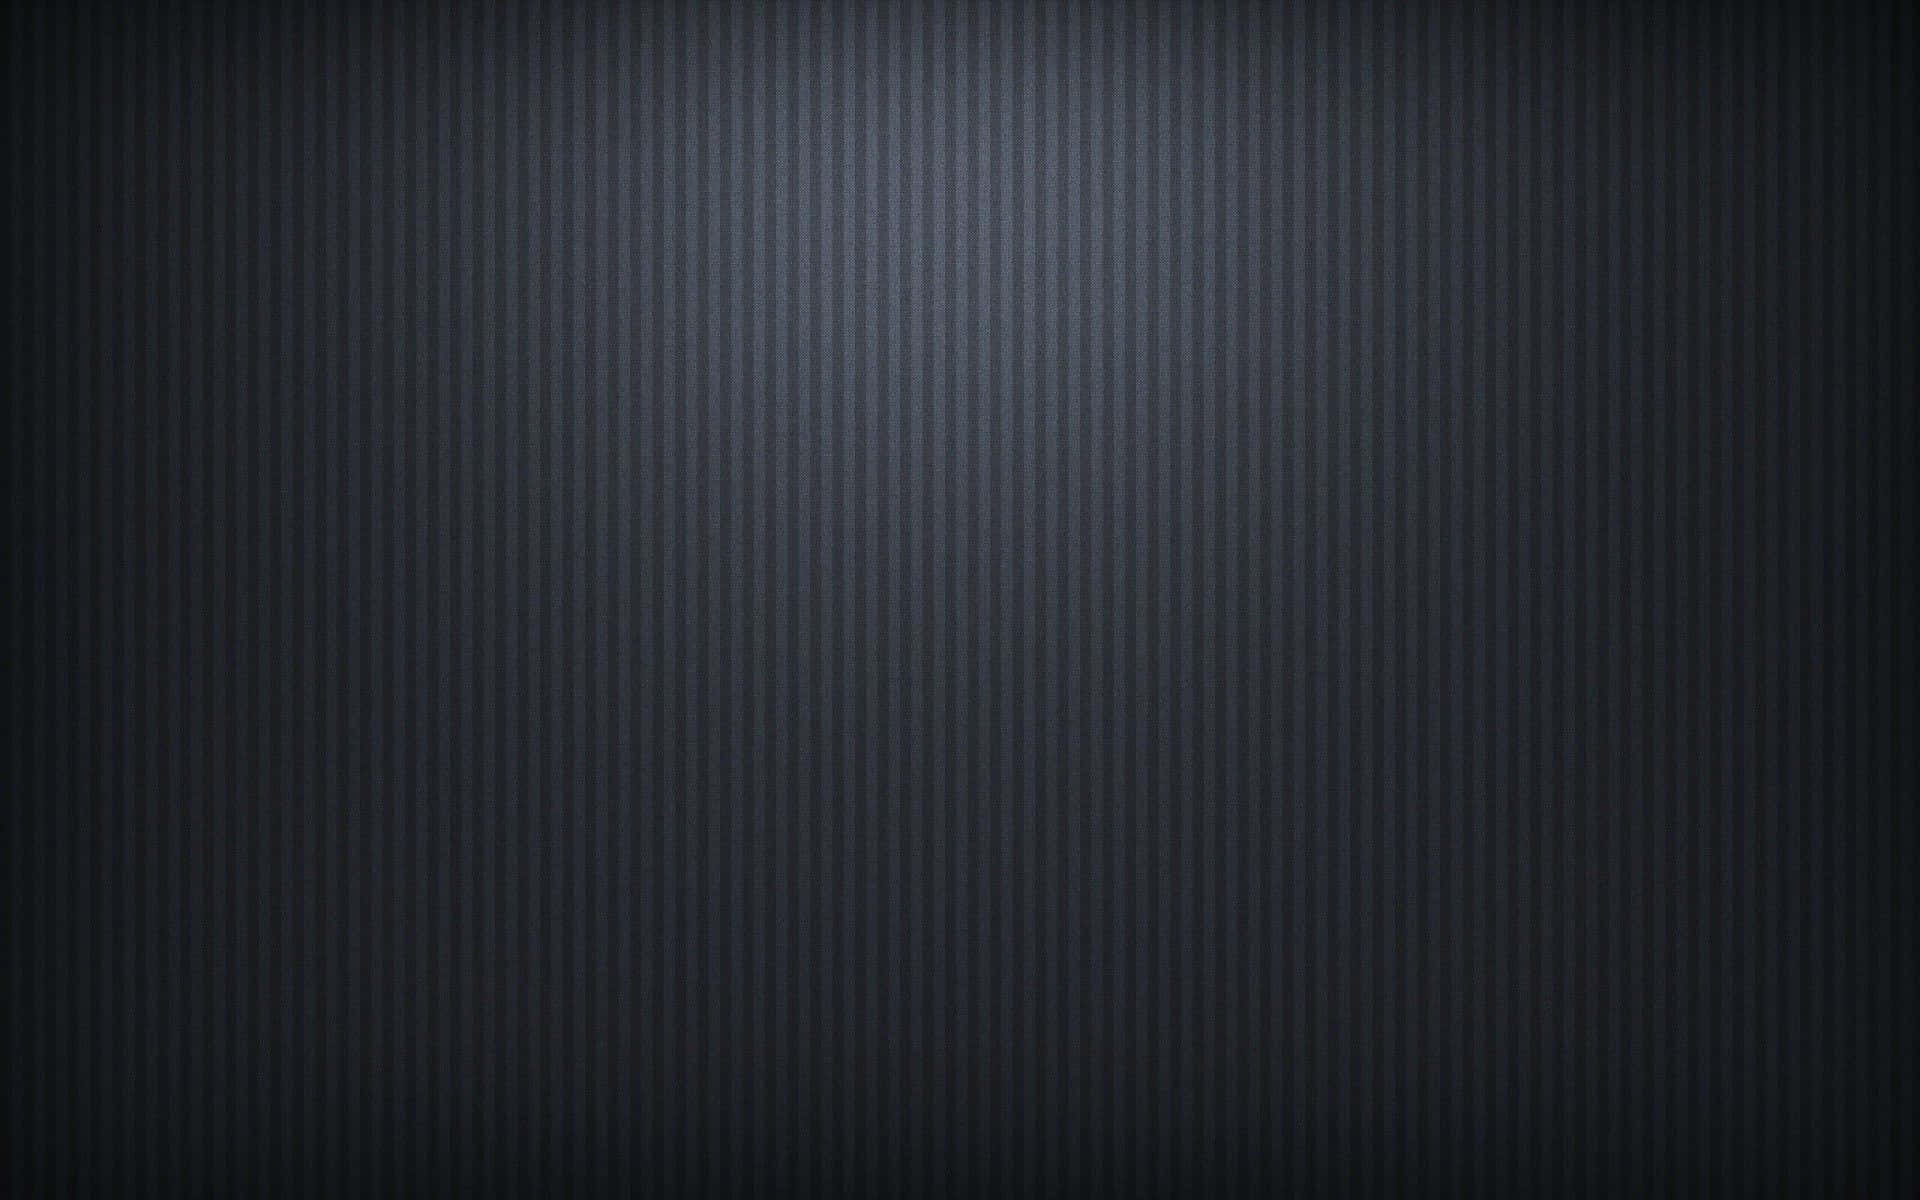 A vibrant grey blue abstract background